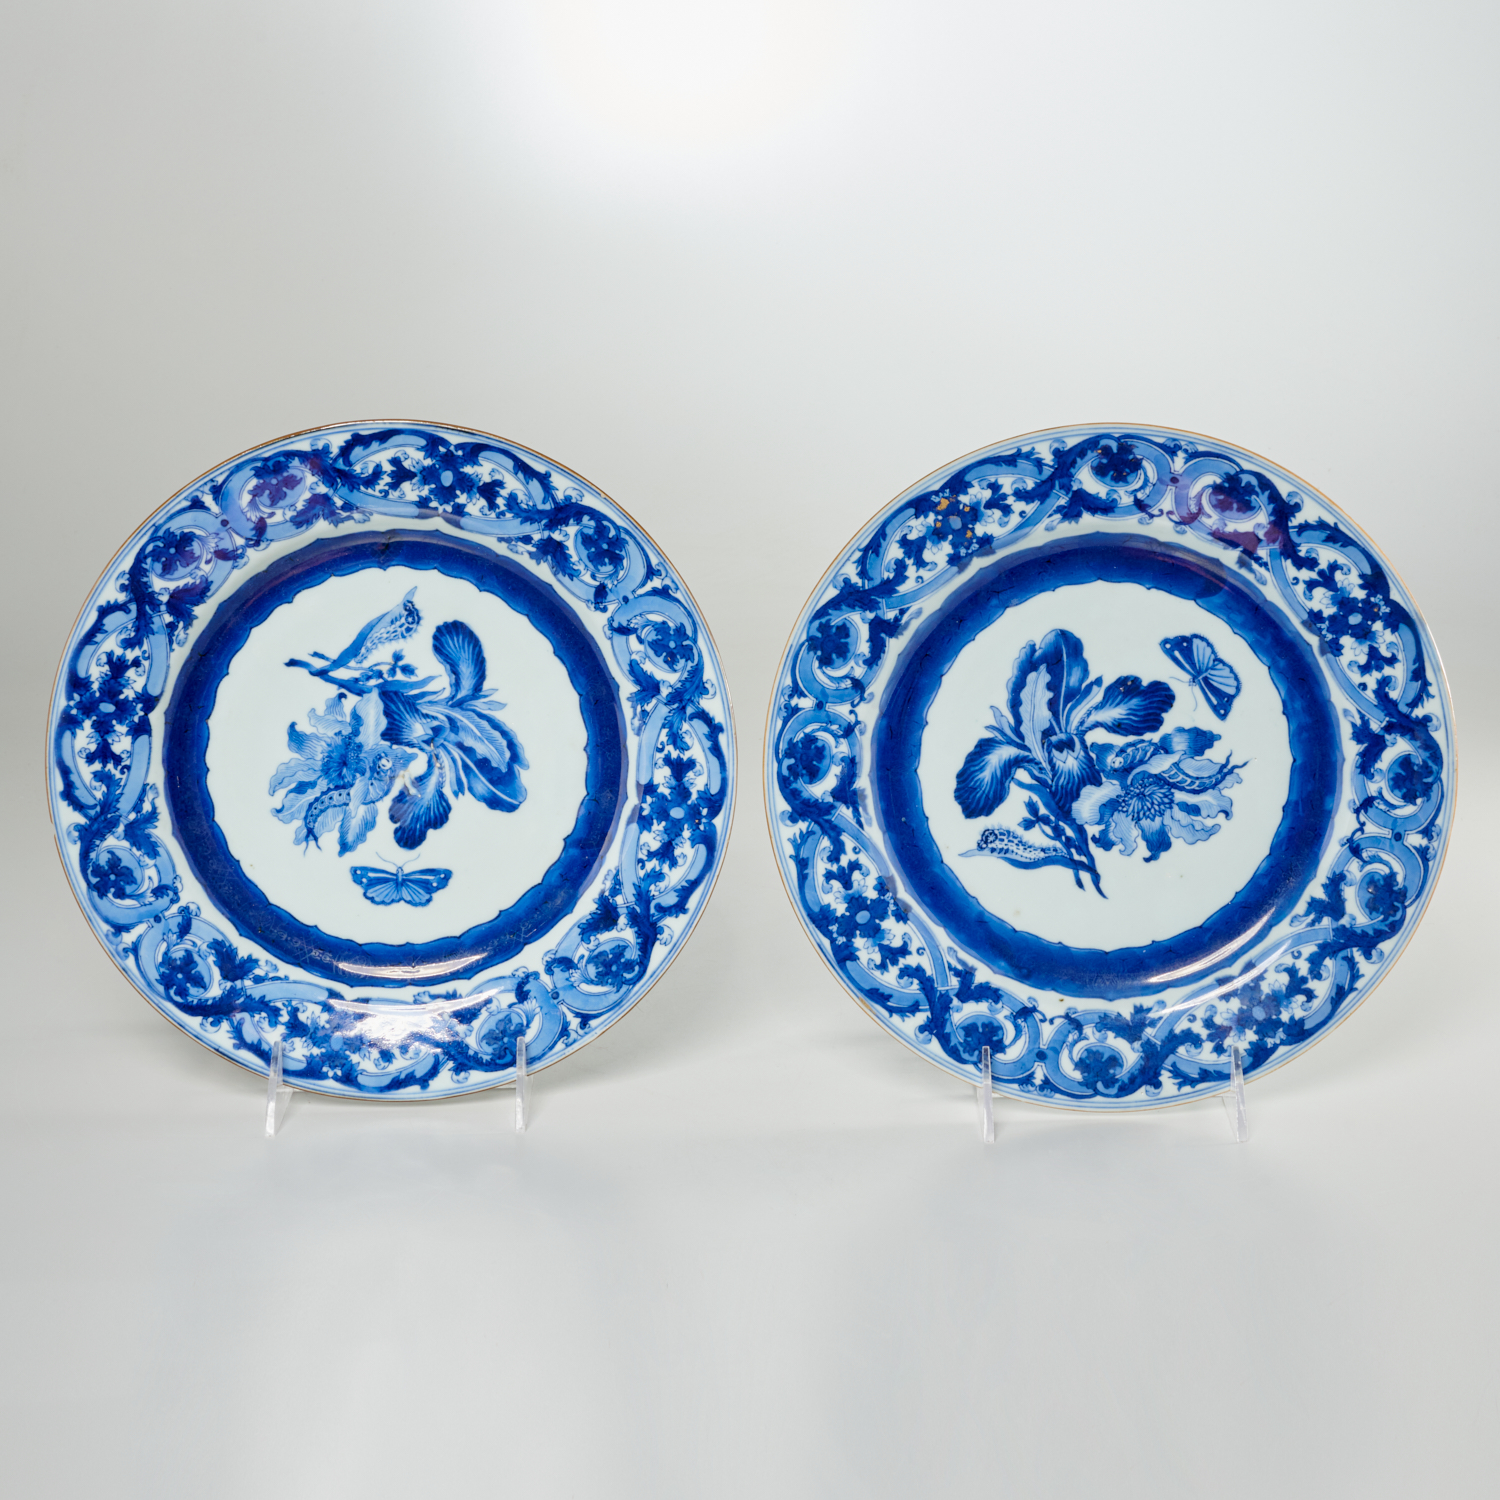 NICE PAIR CHINESE EXPORT PORCELAIN 3618df